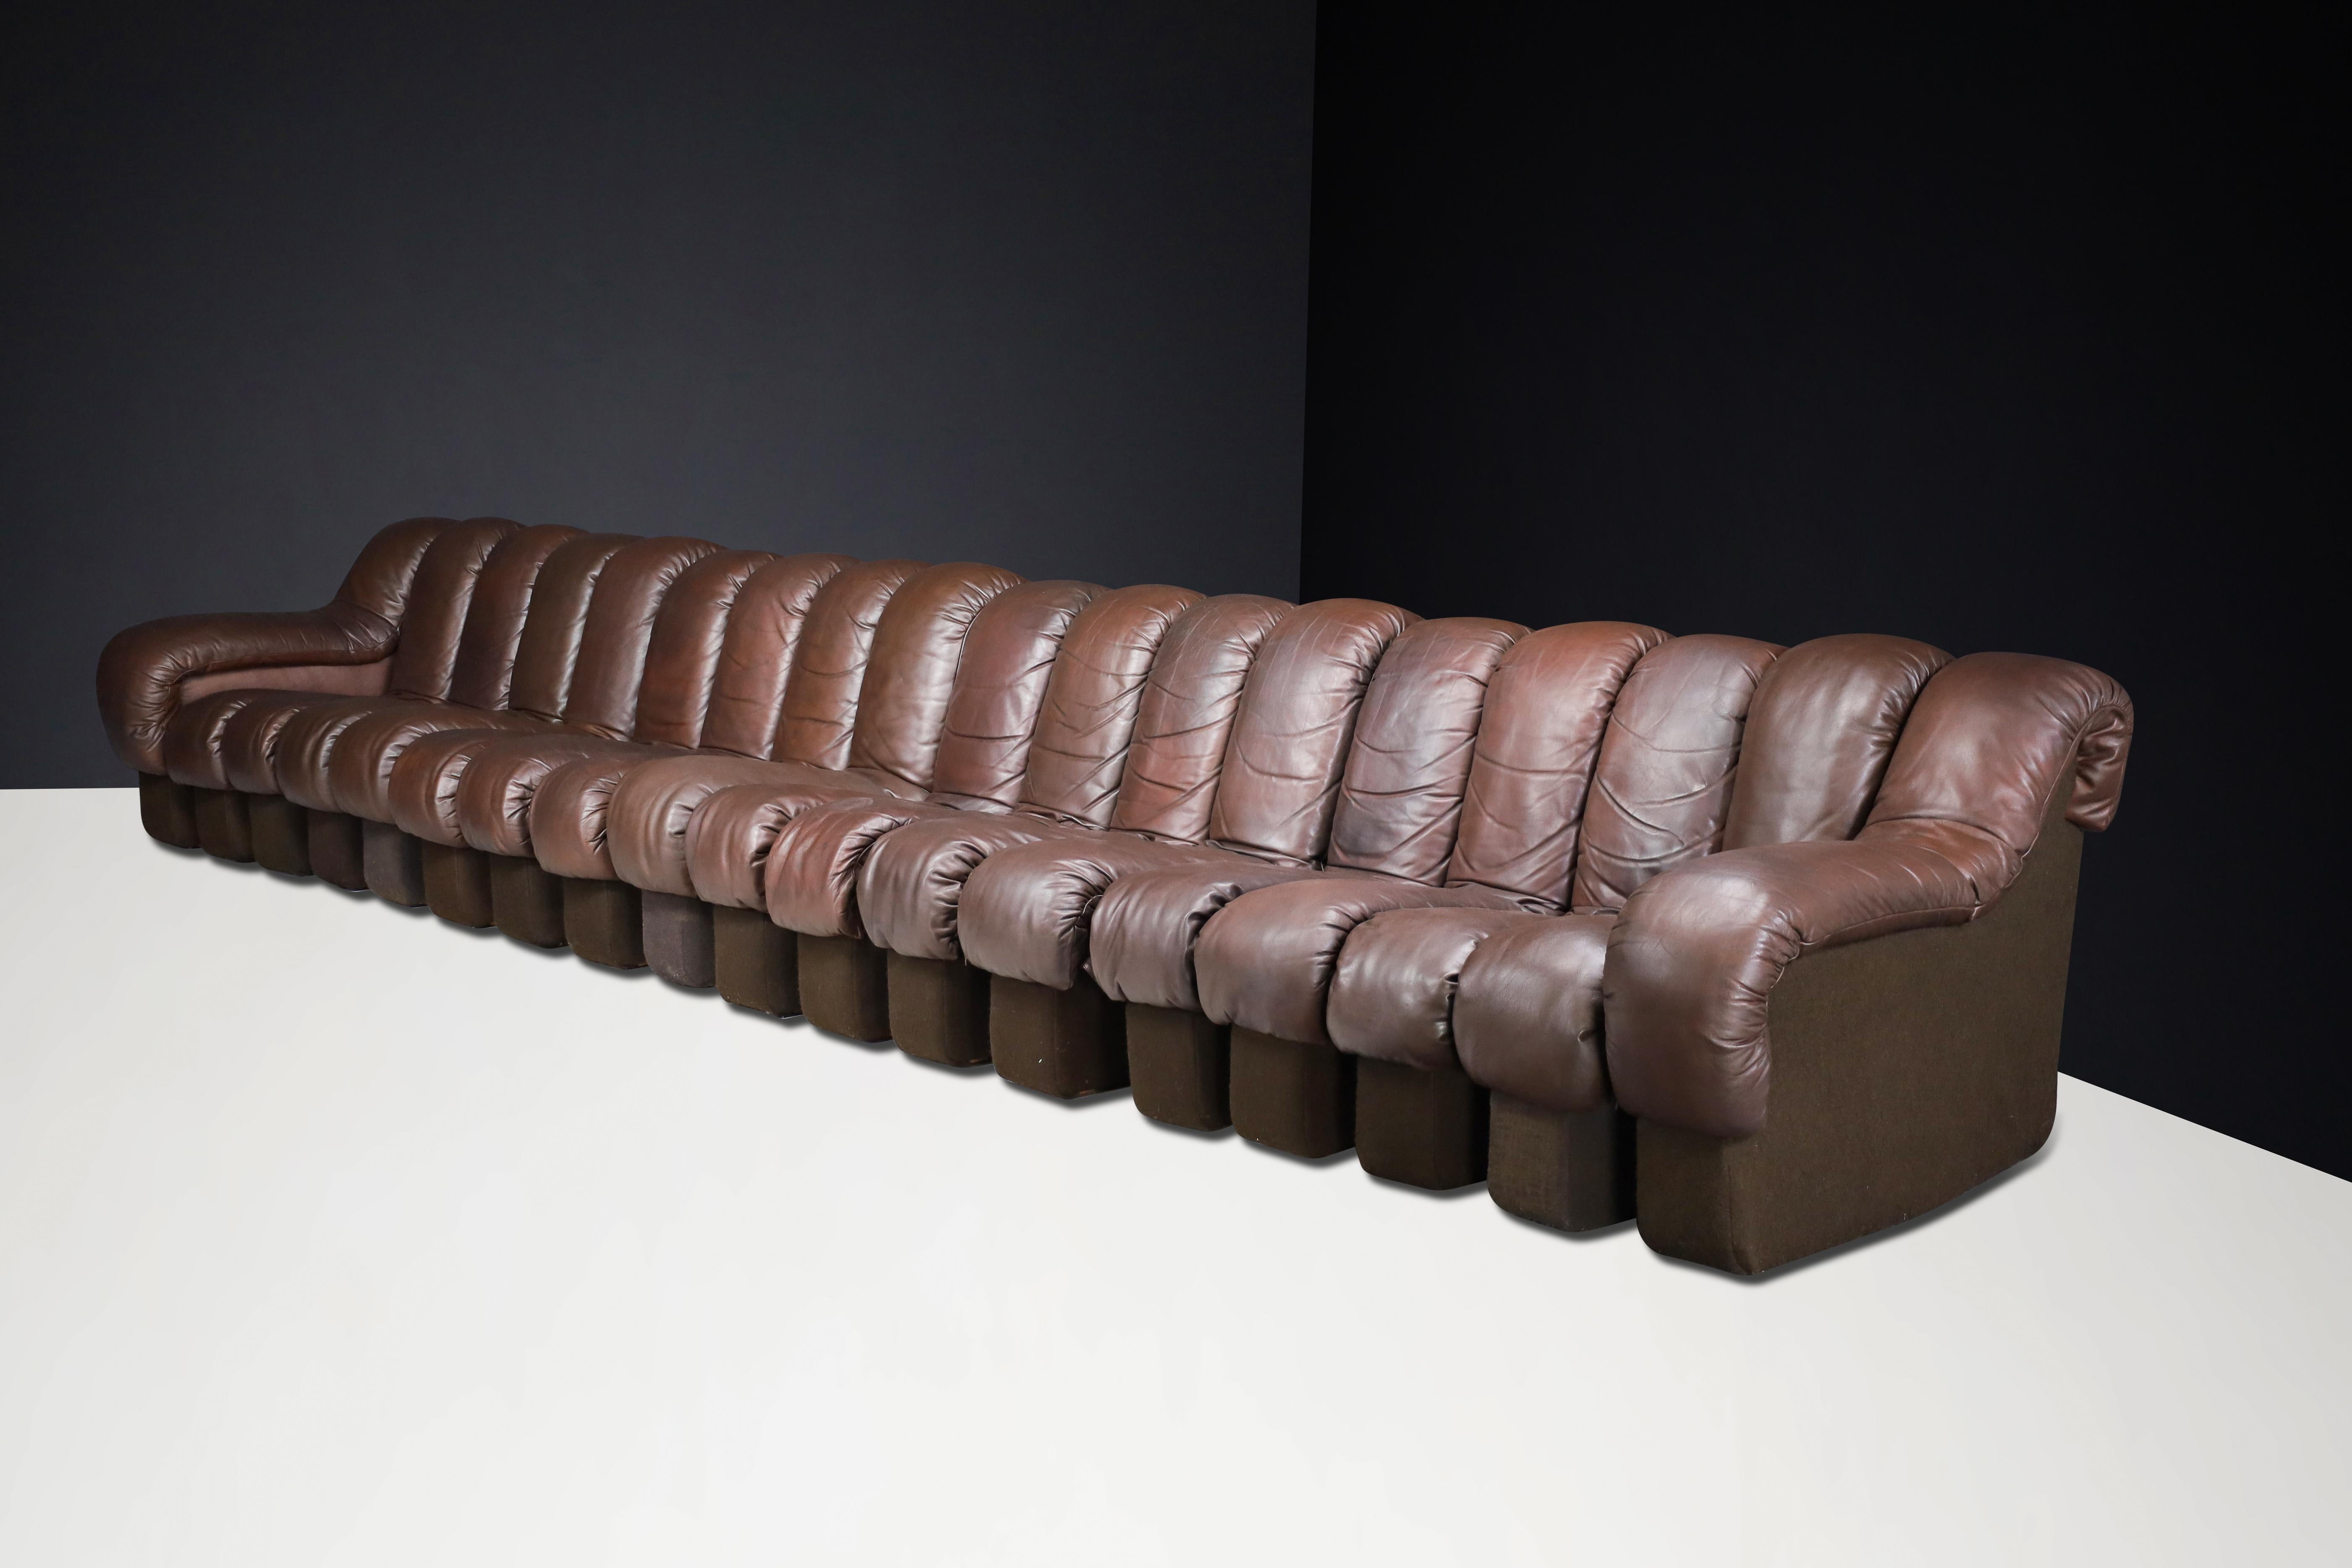 20th Century De Sede DS-600 'Snake' Sectional Sofa in Patinated Brown Leather by Ueli Berger. For Sale